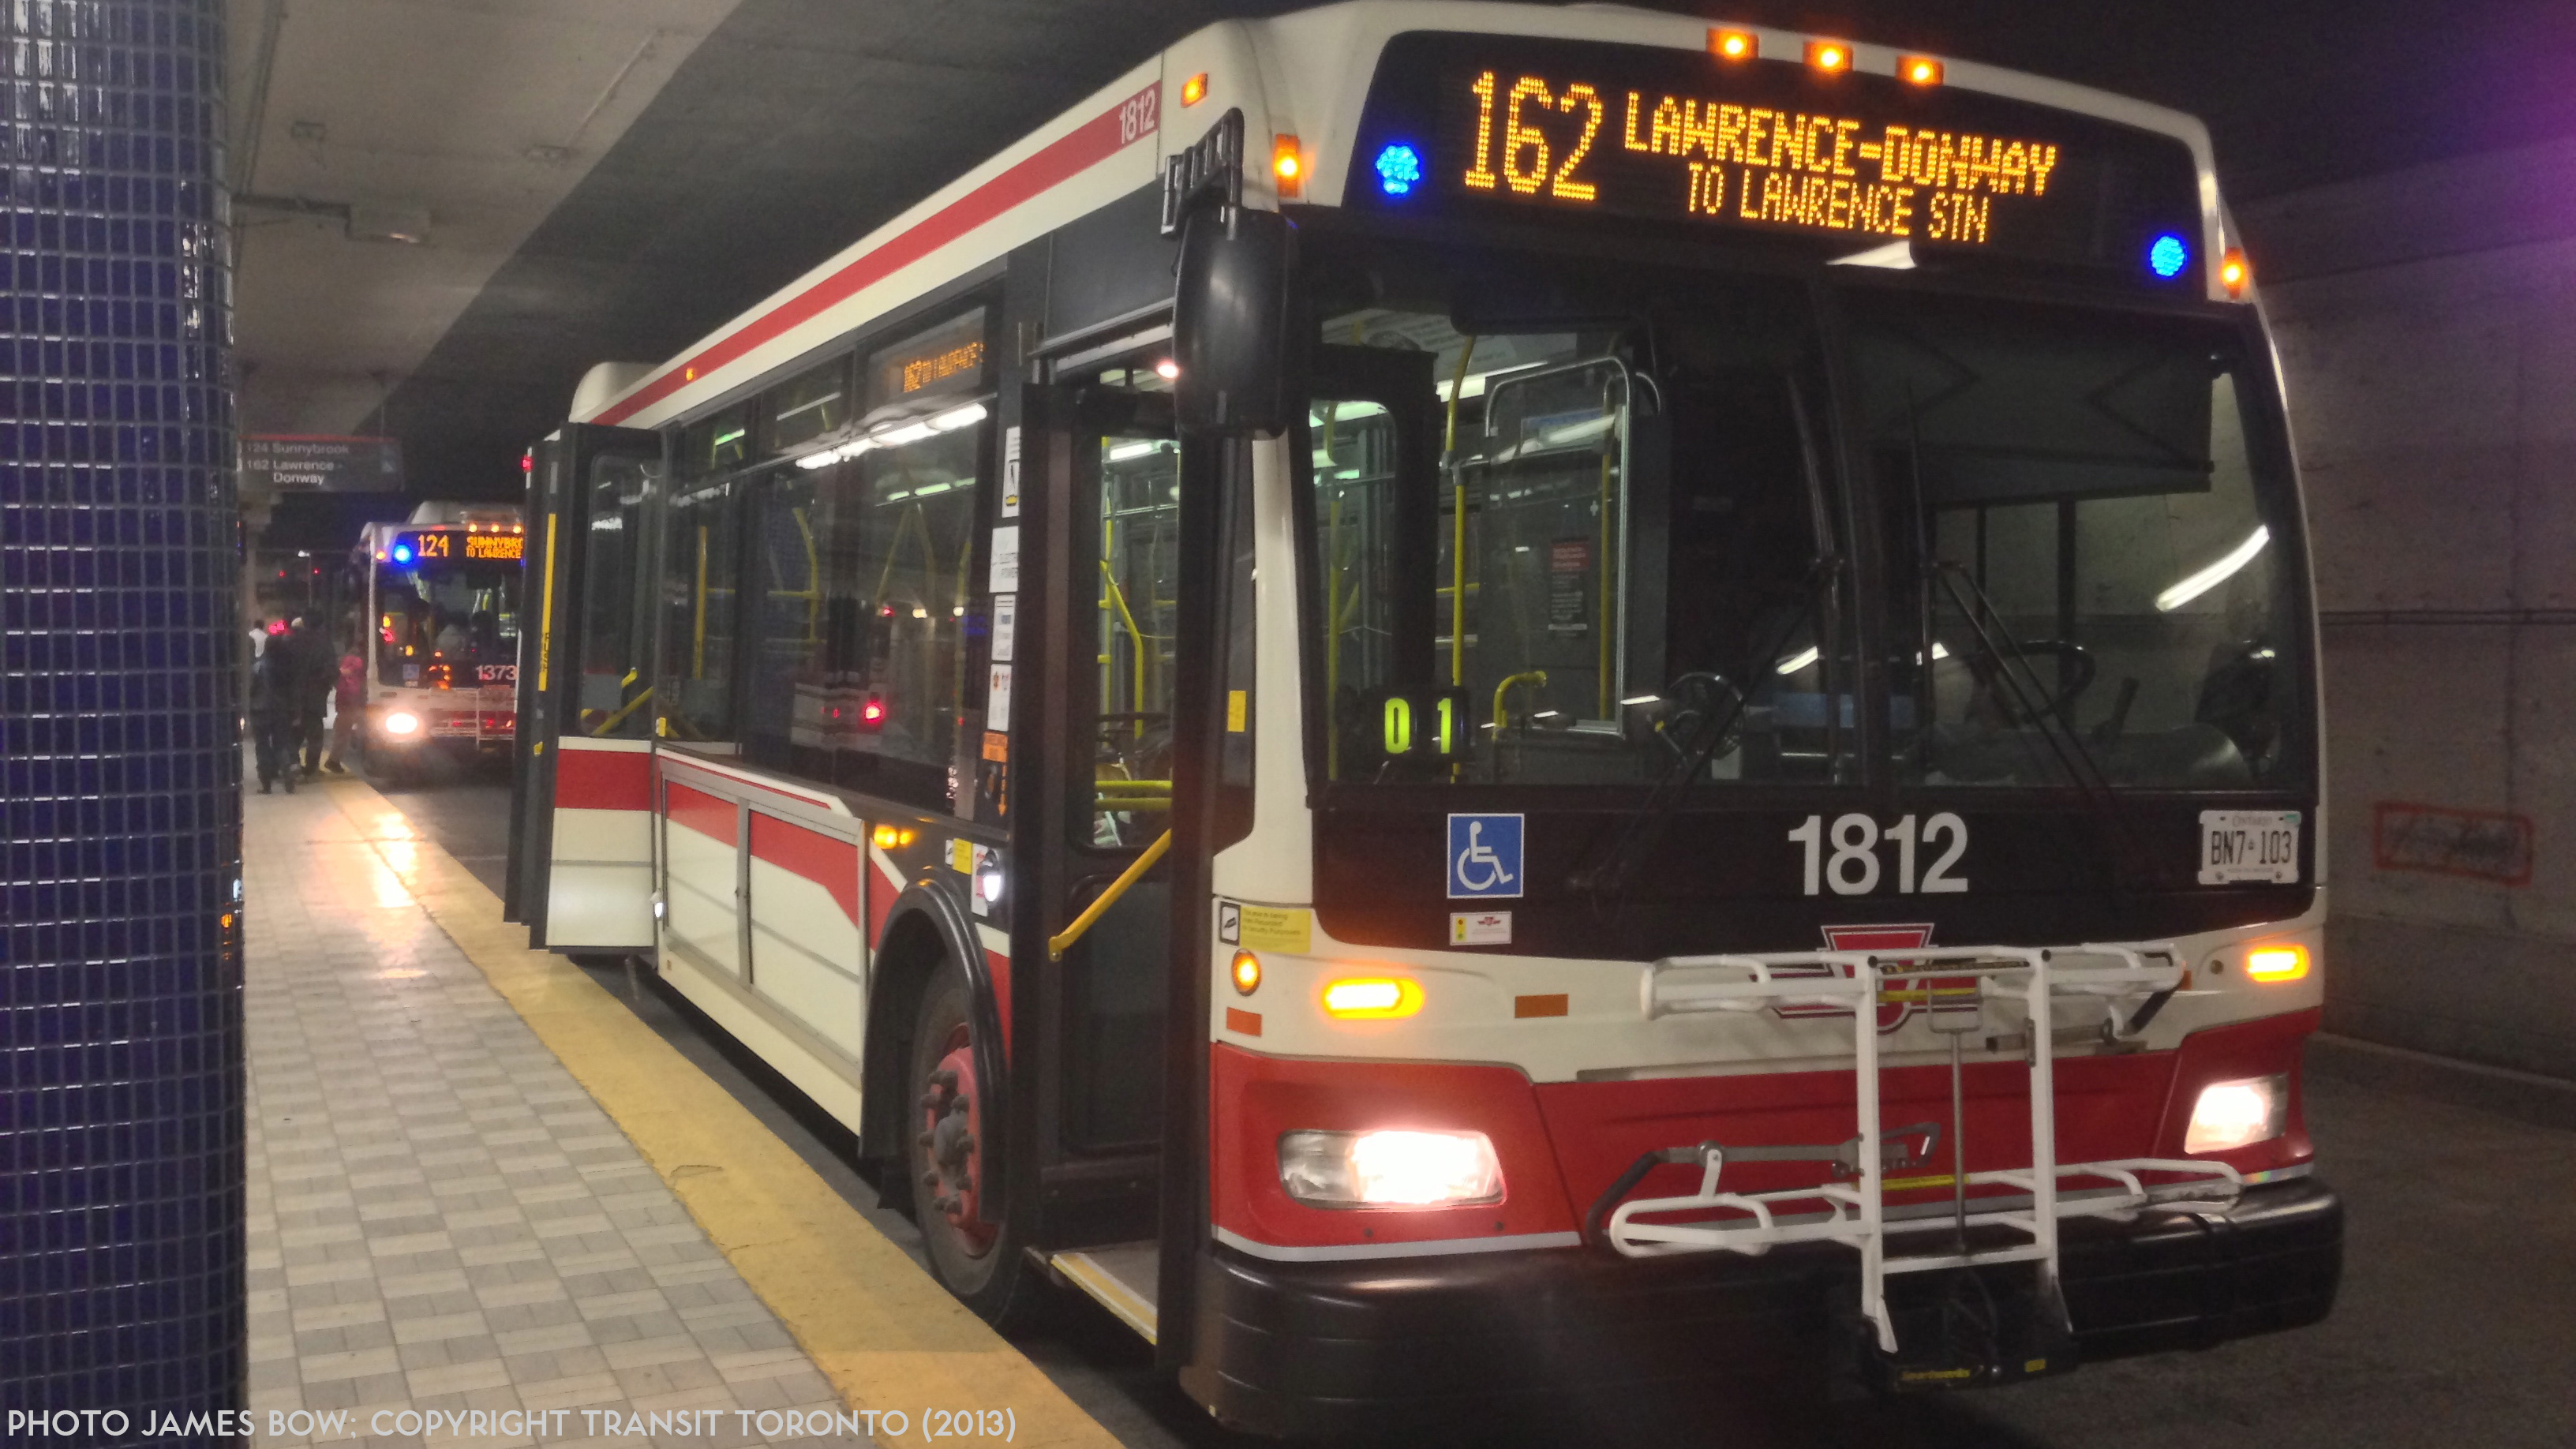 162 lawrence-donway - transit toronto - surface route histories